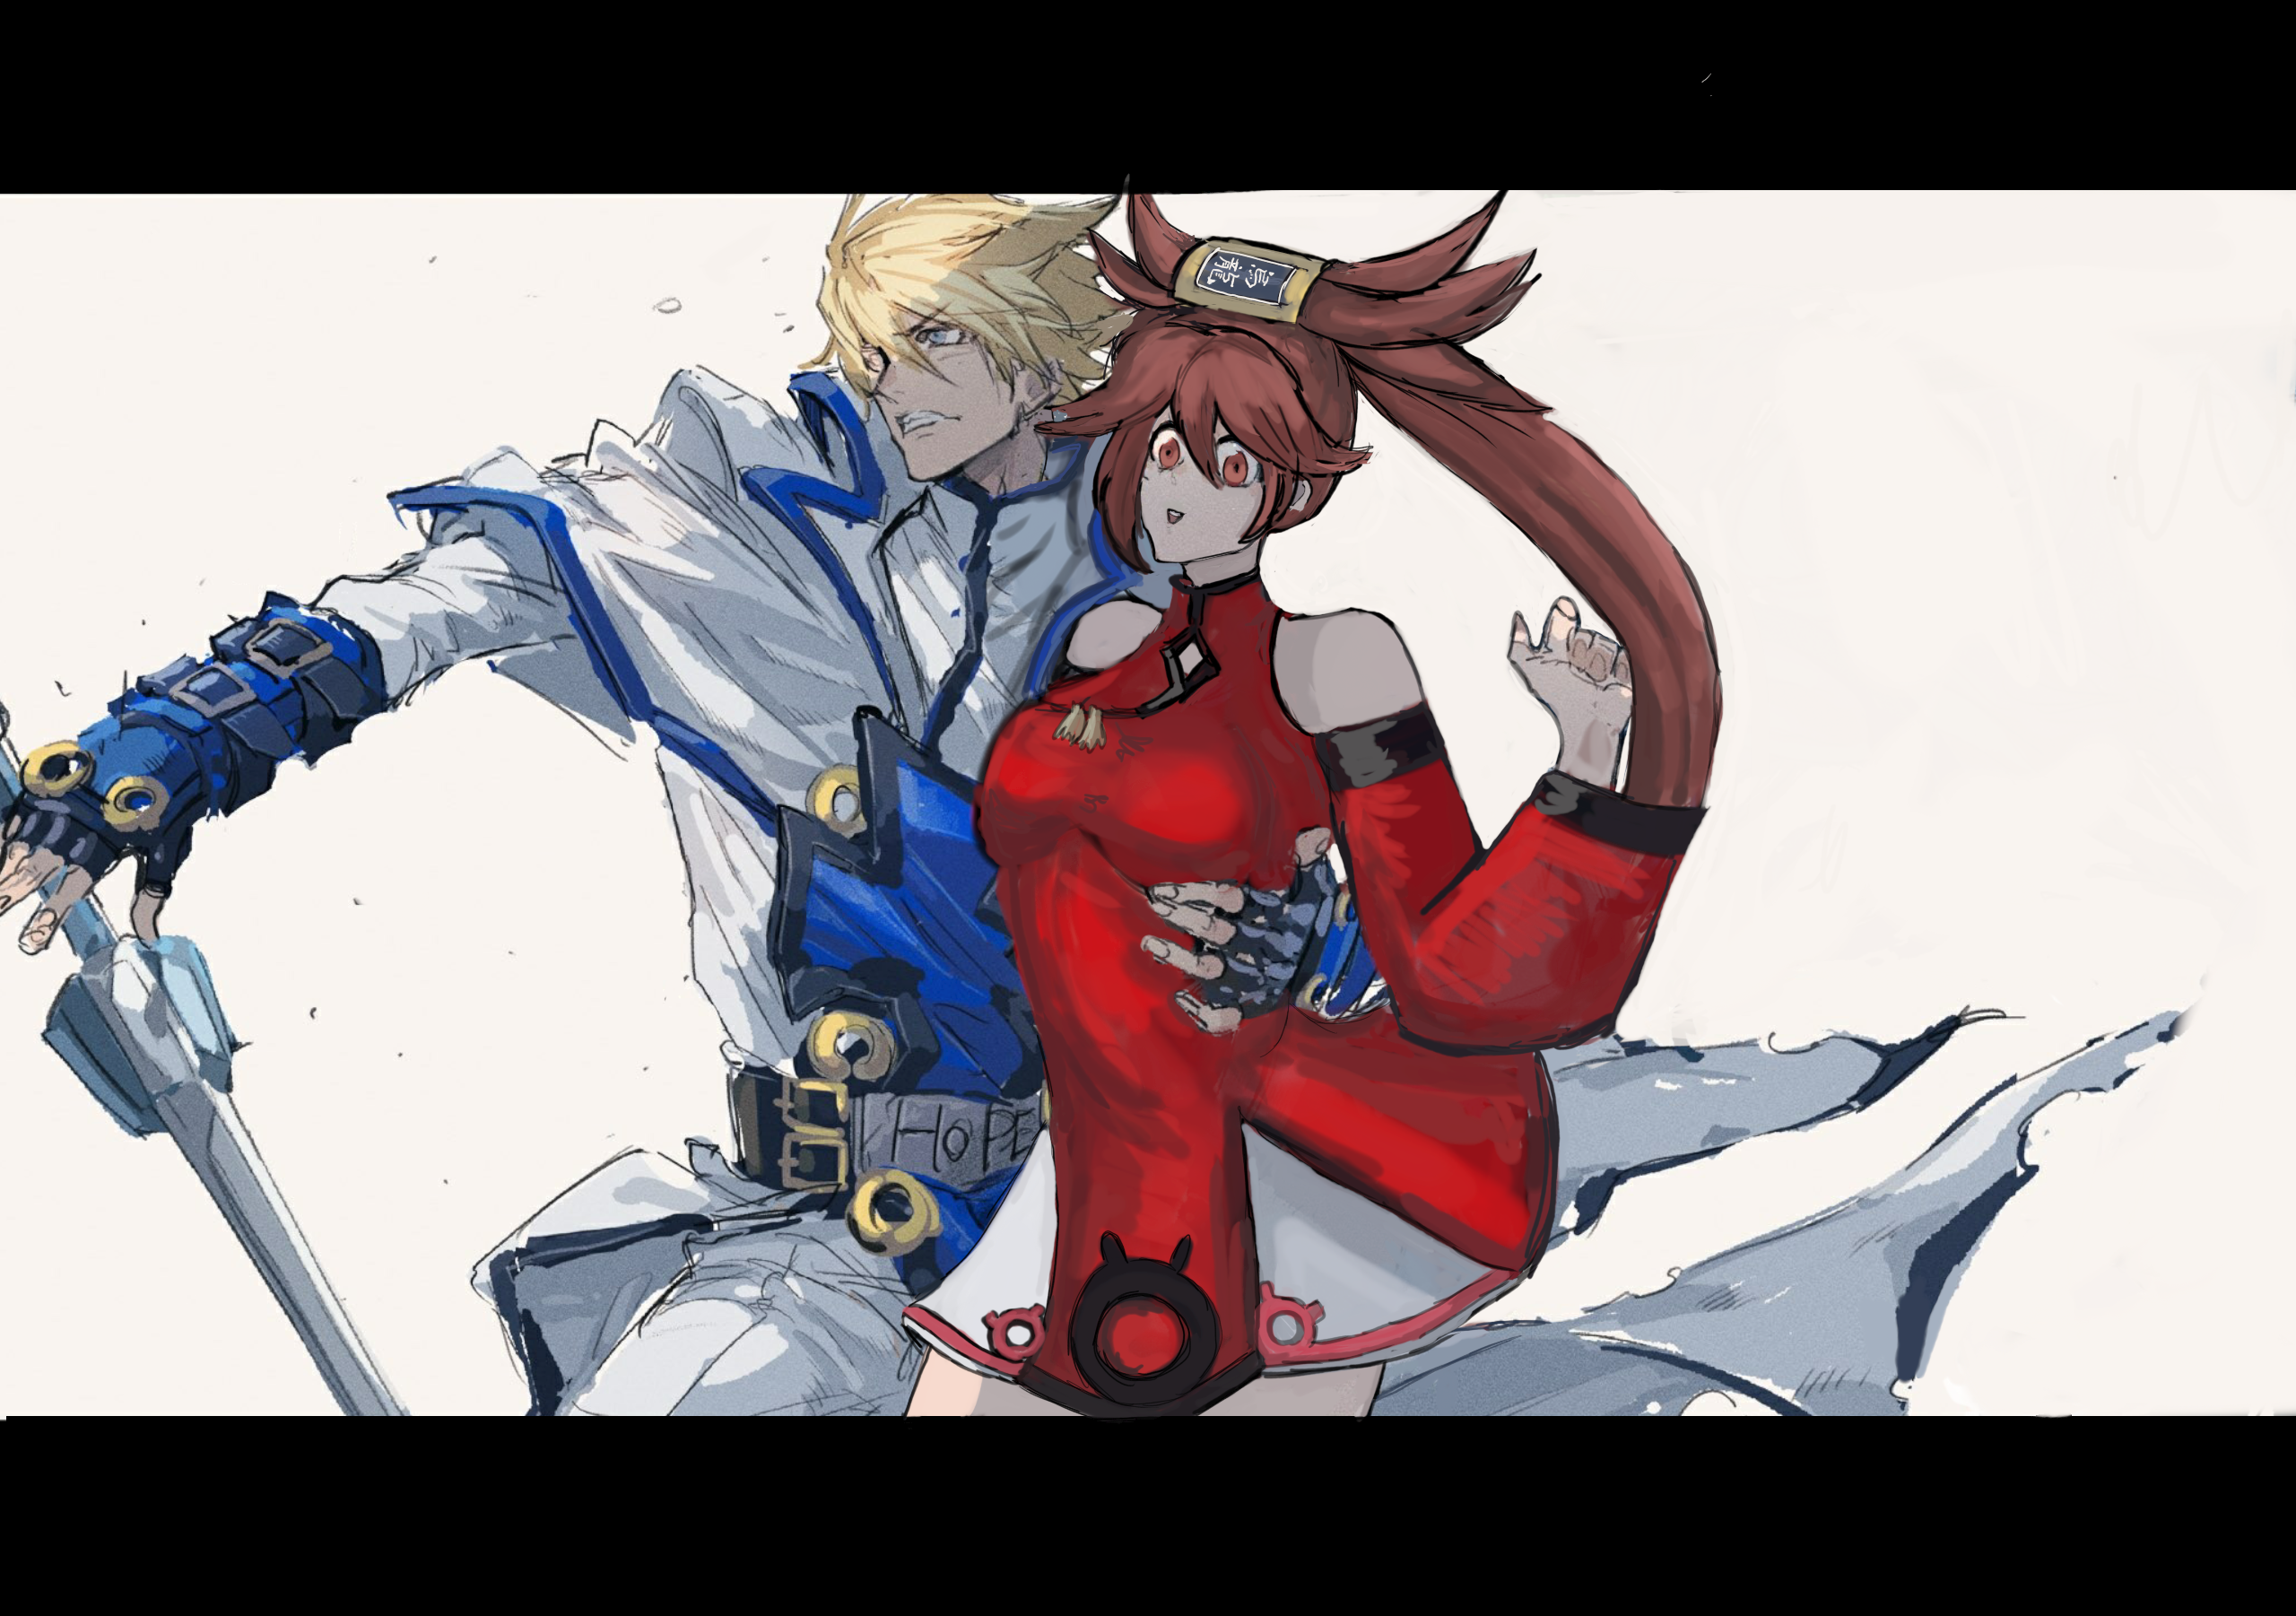 couple cleavage closed eyes Guilty gear strive Guilty Gear Dizzy Guilty  Gear Testament guilty gear anime games anime girls anime couple  Fighting Games hat gloves fingerless gloves cross  2430x1625 Wallpaper  